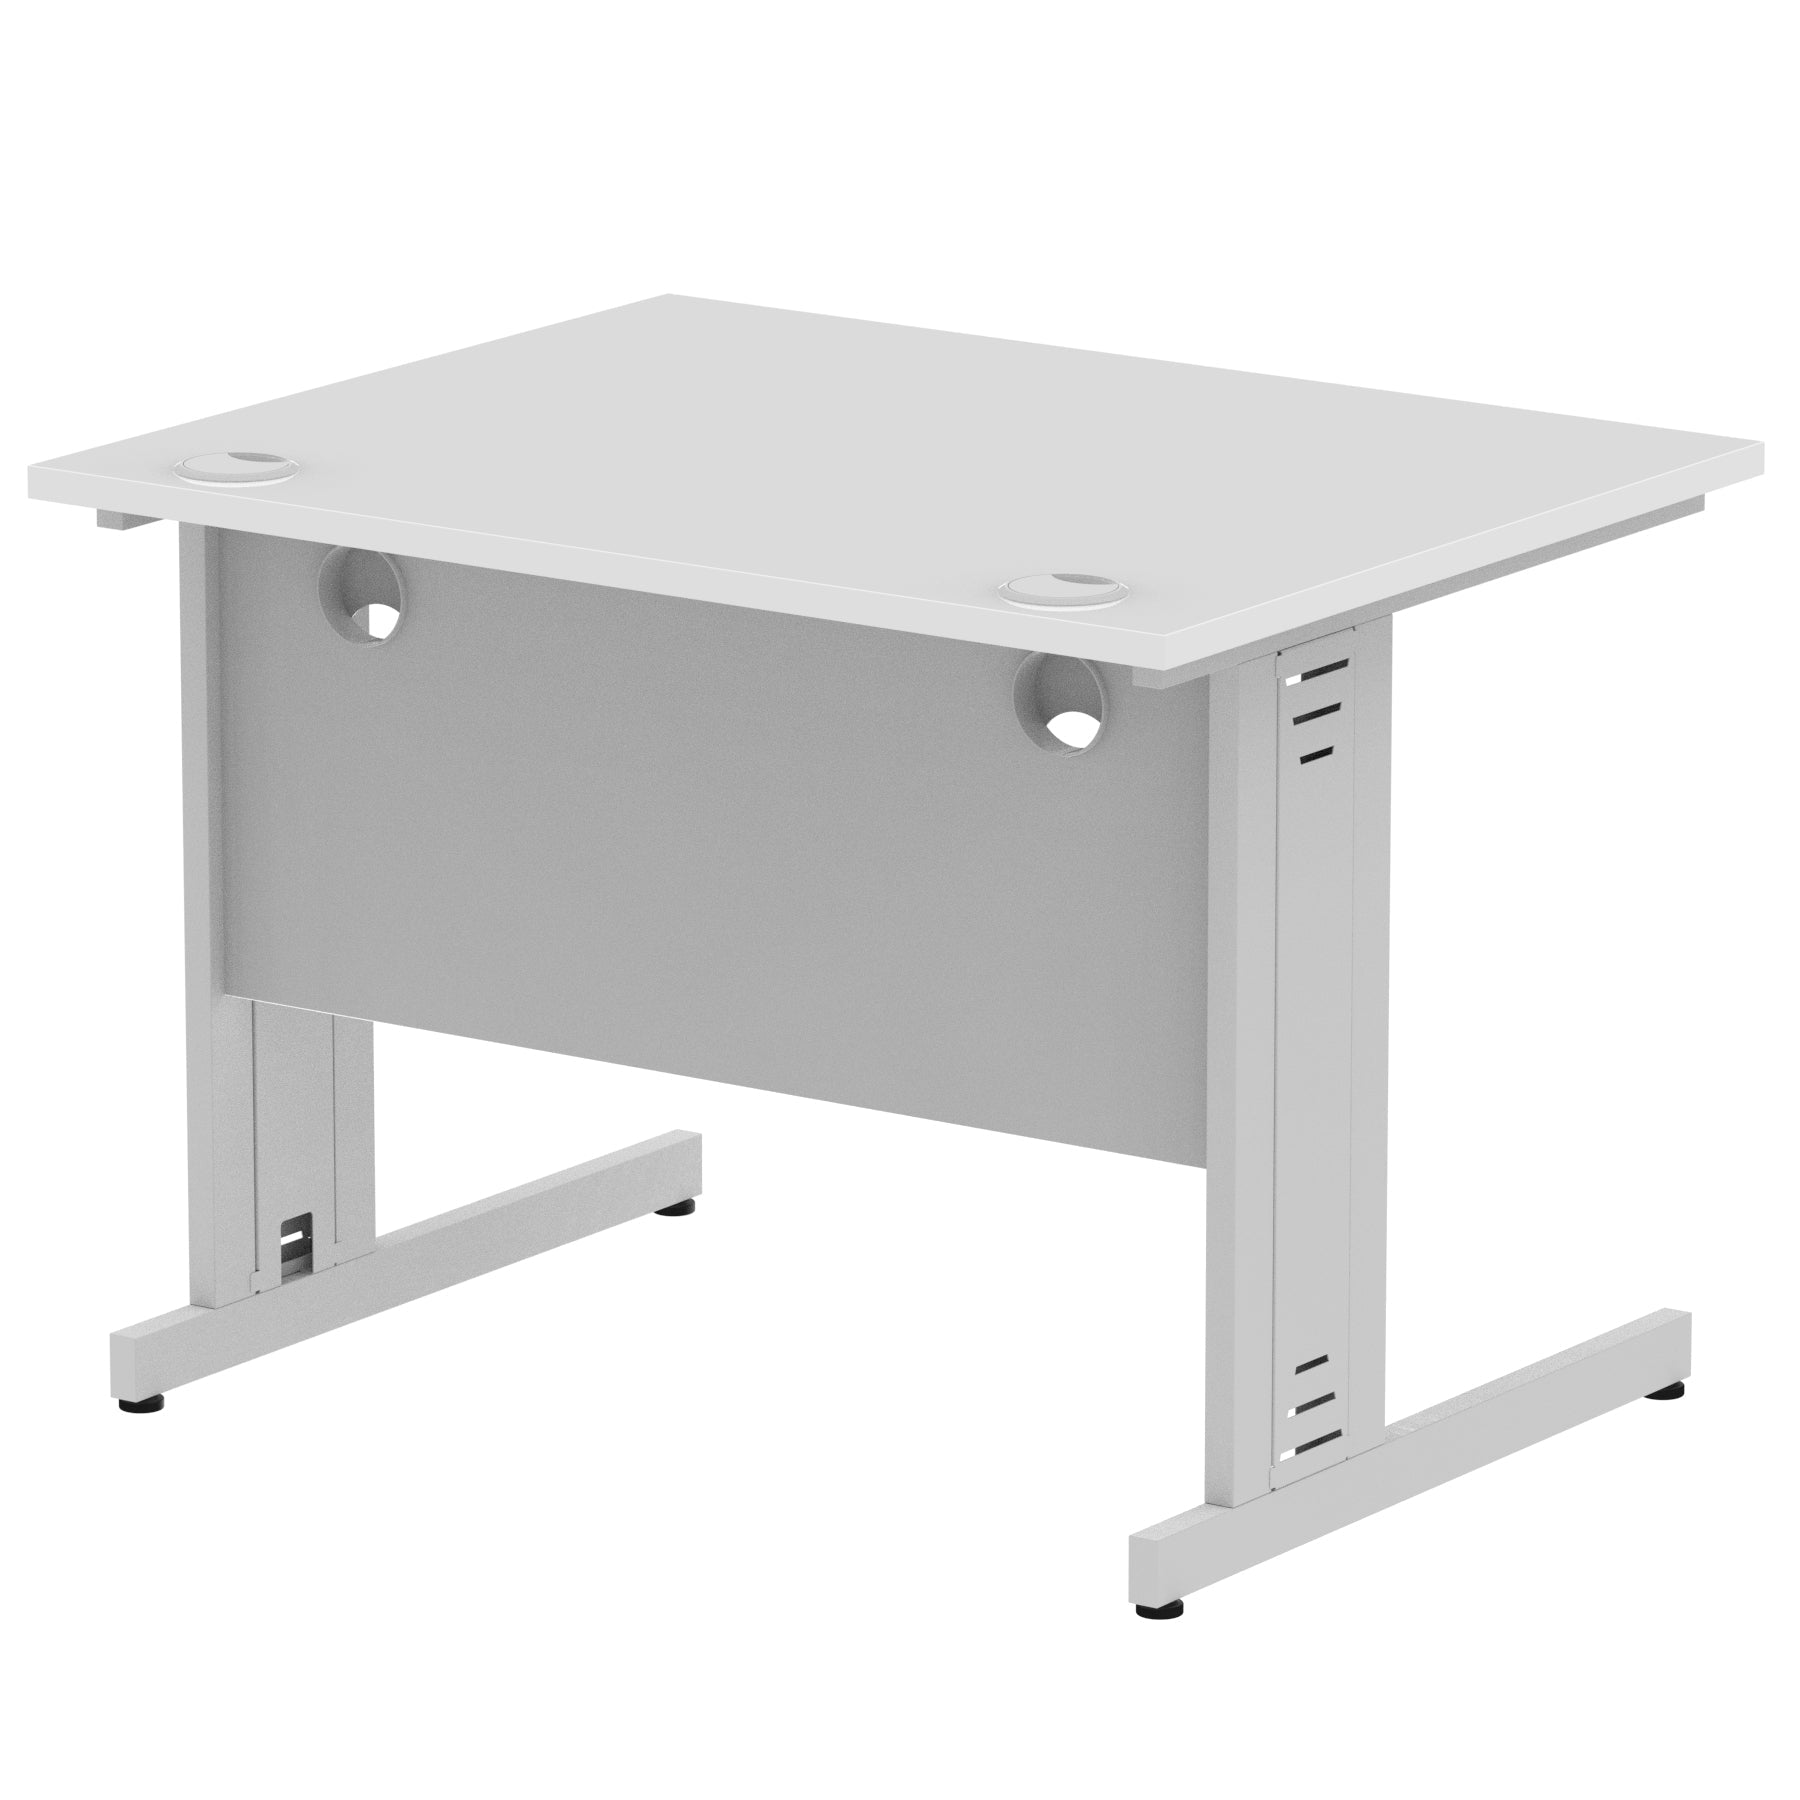 Impulse 1000mm Straight Desk with Cable Managed Leg - MFC Rectangular Table, 5-Year Guarantee, Self-Assembly, Silver/White Frame (1000x800x730mm)